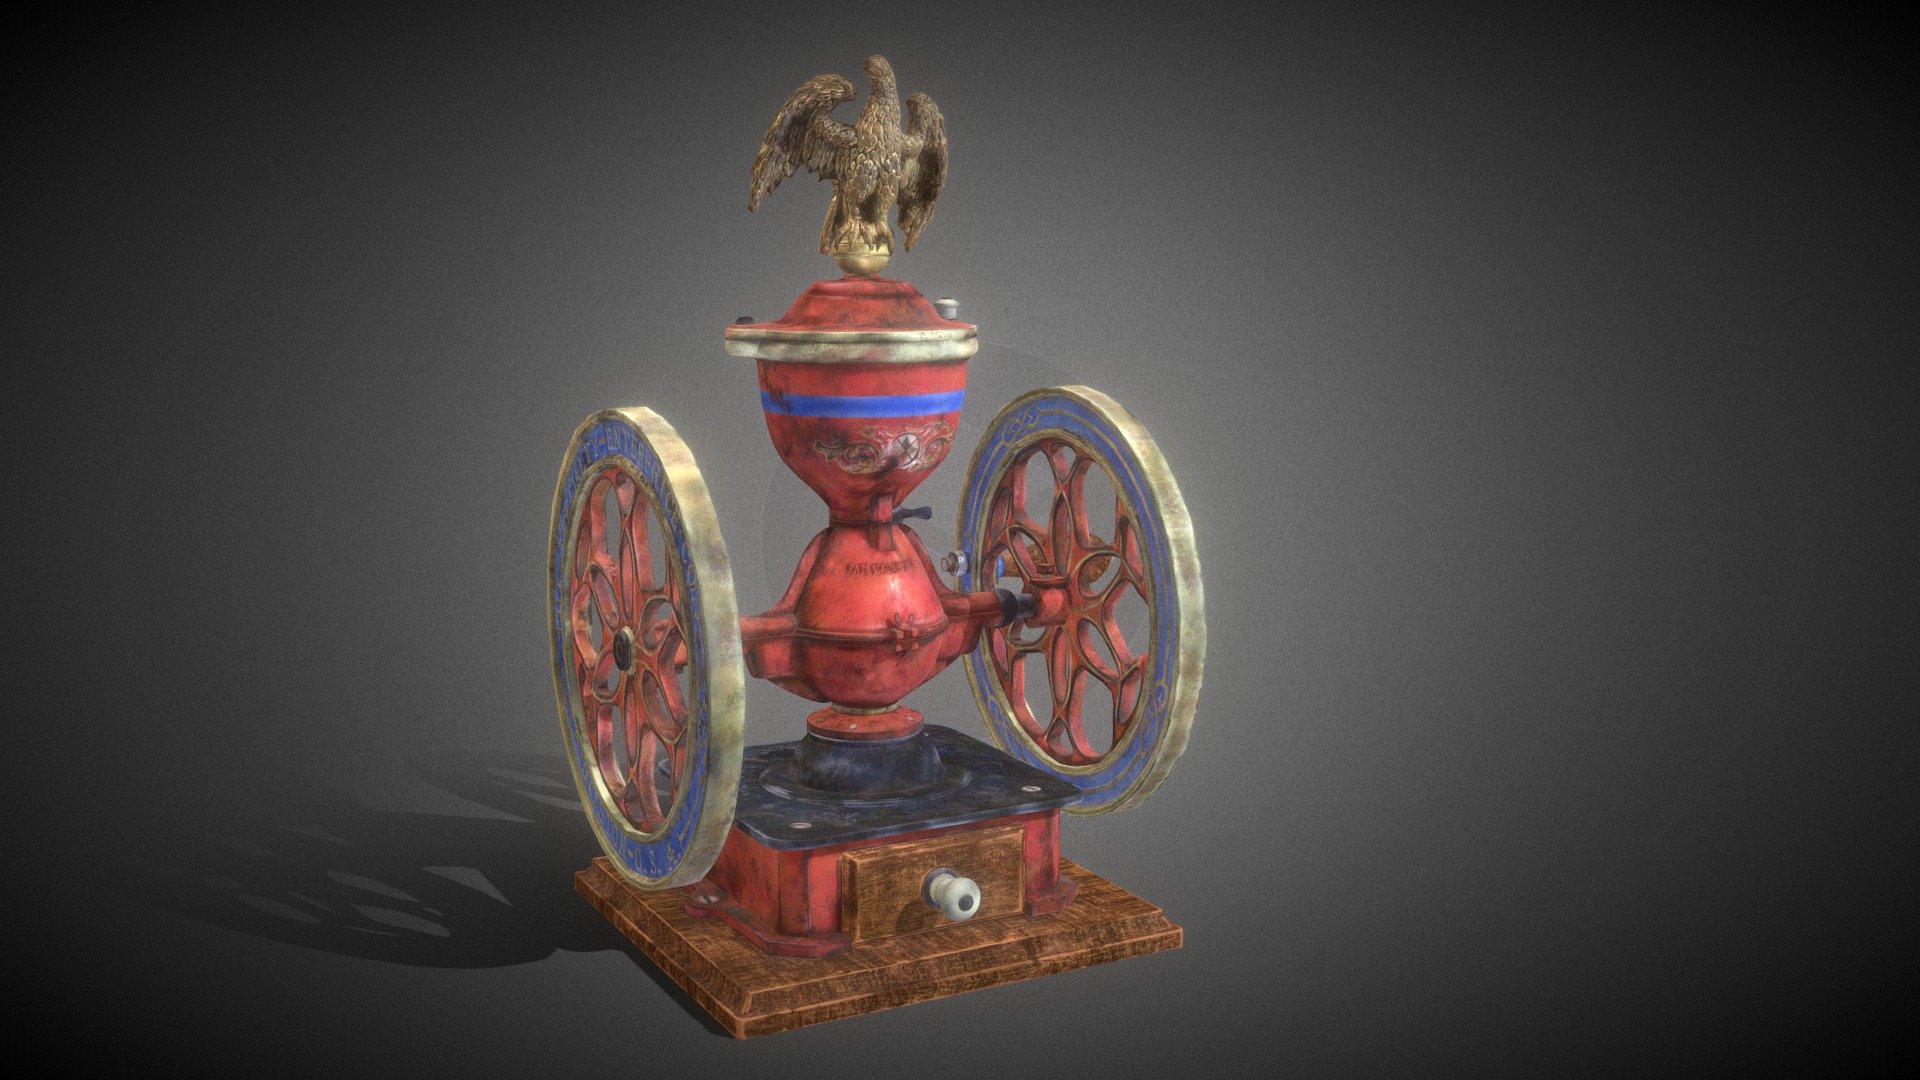 An Antique Coffee Grinder Inspired in various real objects ready for a game engine it has 12481 verts 29442 edges 23942 tris and 16928 polys and the texture are PBR and 4K including Albedo, roughness, metallic, AO and Normal Map also included the 3DS Max File and Maya File if you need 3D game Assets or STL files I can do commission works.

A little bit of history 

The first coffee grinder was made in the 15th century.
It was a simple hand-cranked device that ground coffee beans into a powder. The powder was then brewed in a pot of hot water. This early method of brewing coffee was known as the &ldquo;Turkish method.